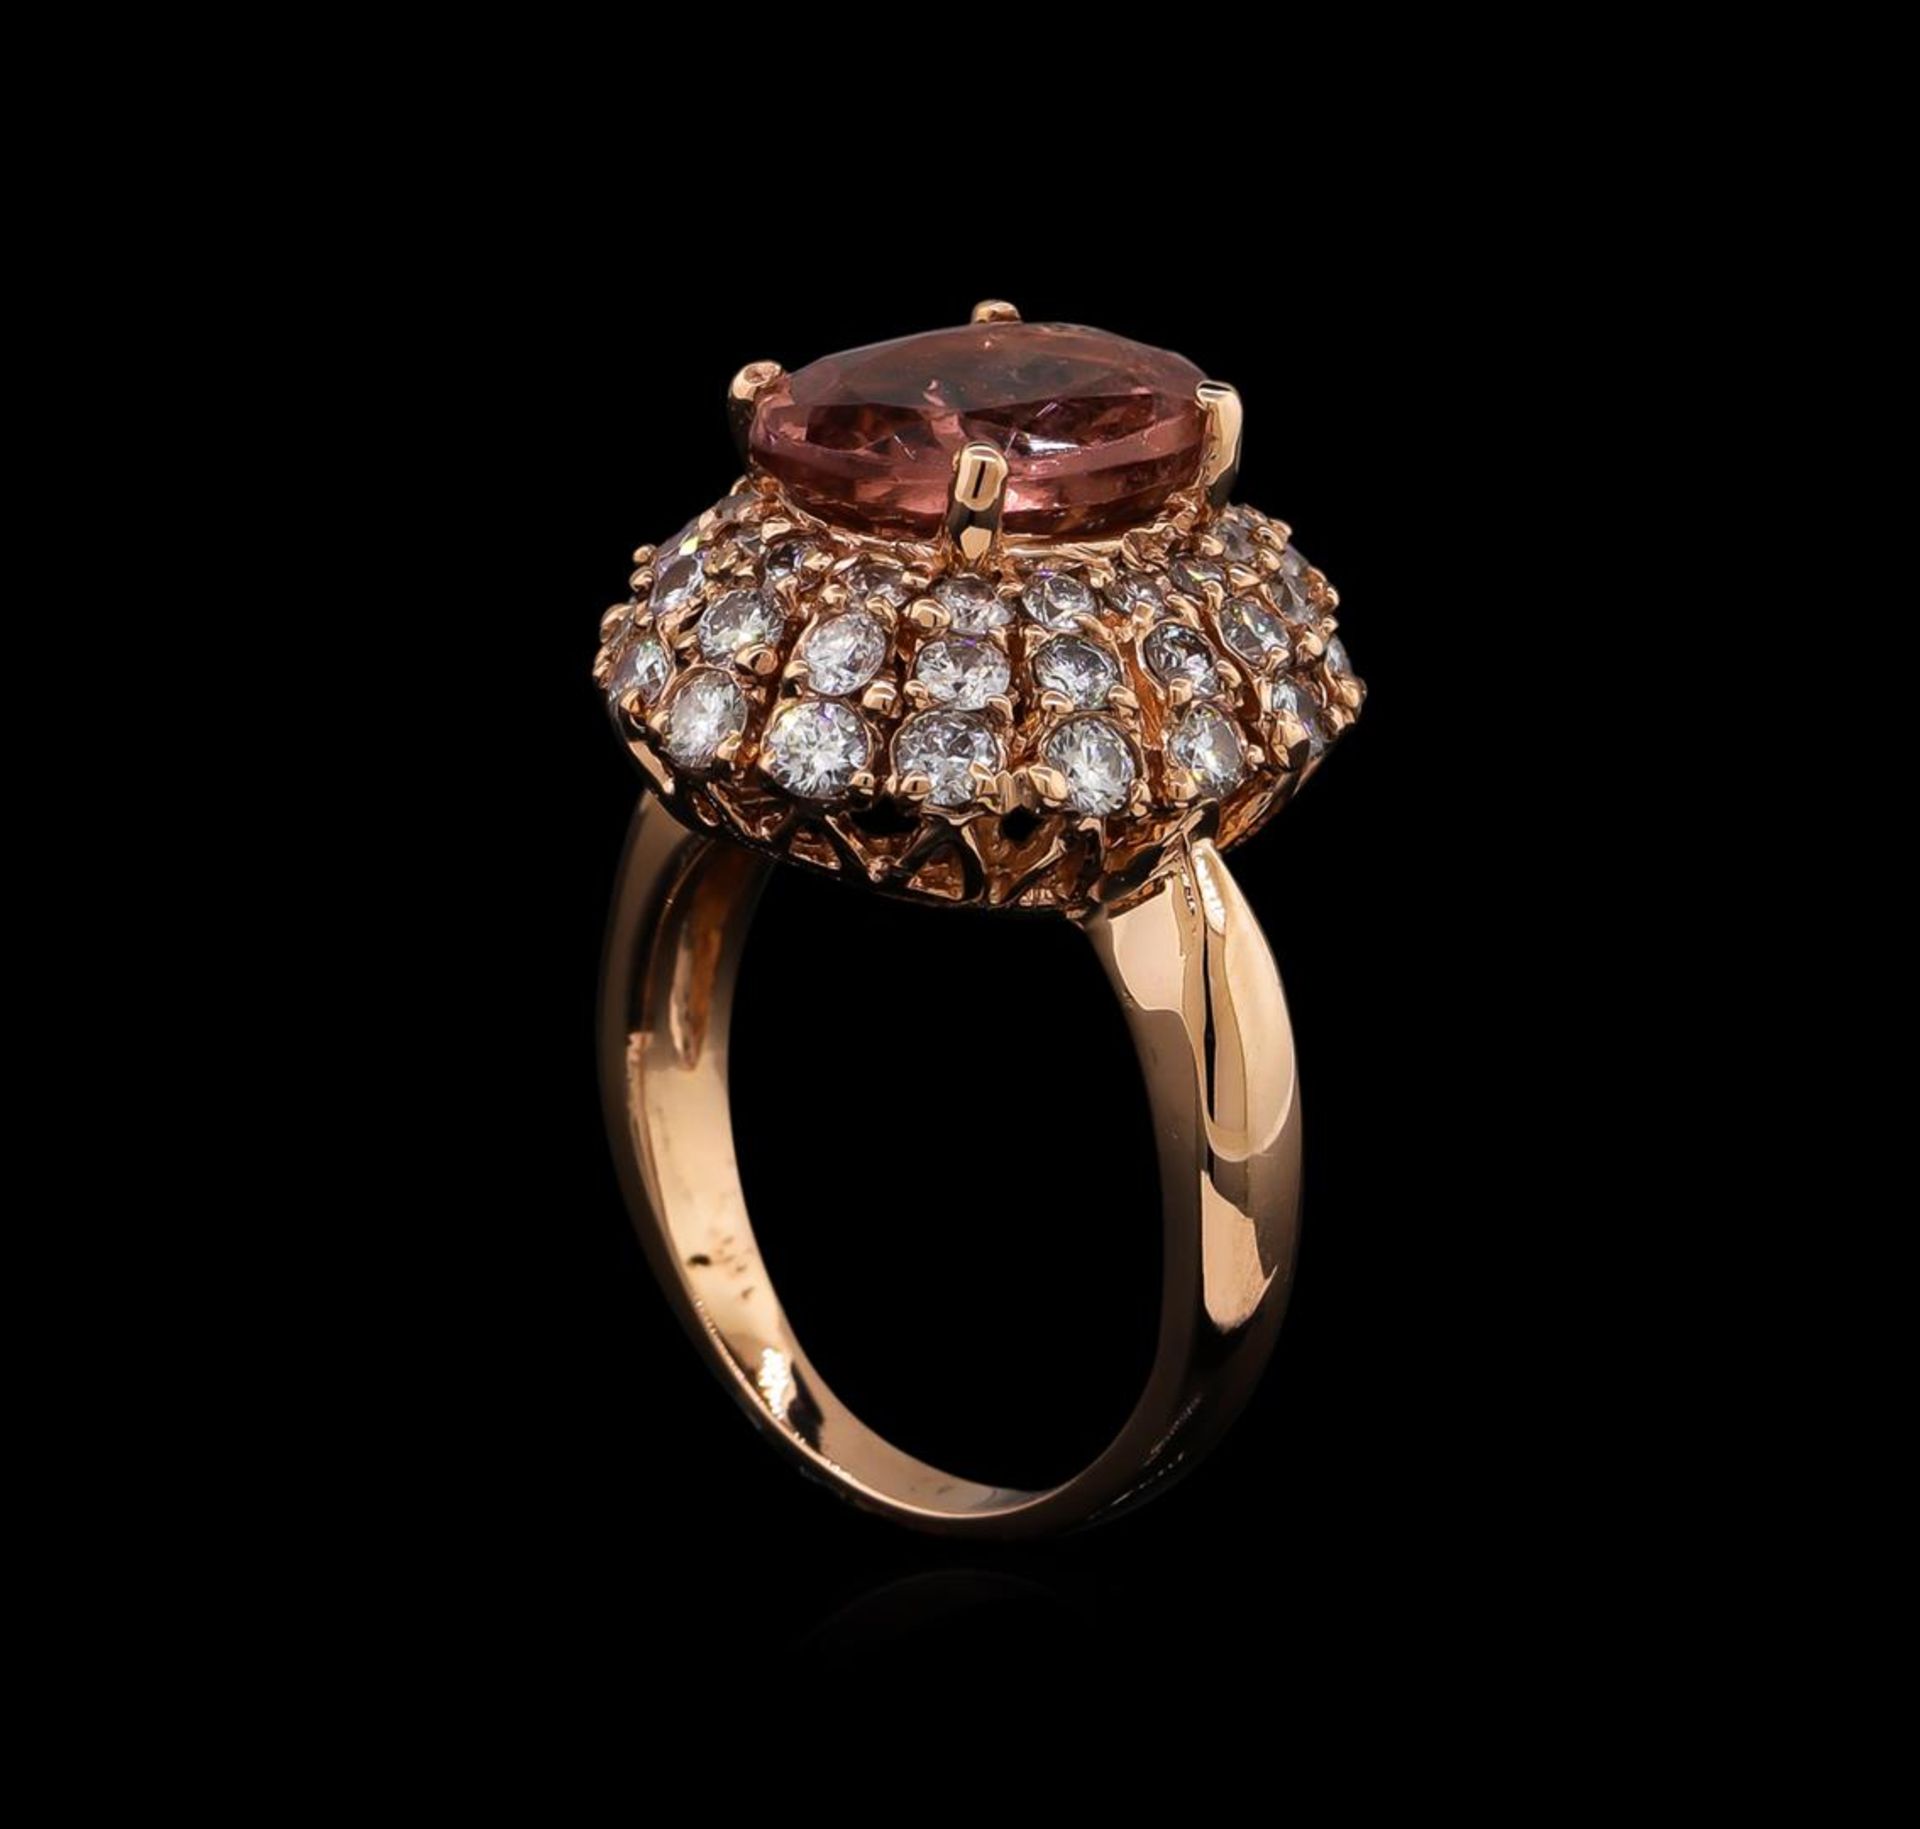 3.70ct Tourmaline and Diamond Ring - 14KT Rose Gold - Image 4 of 6